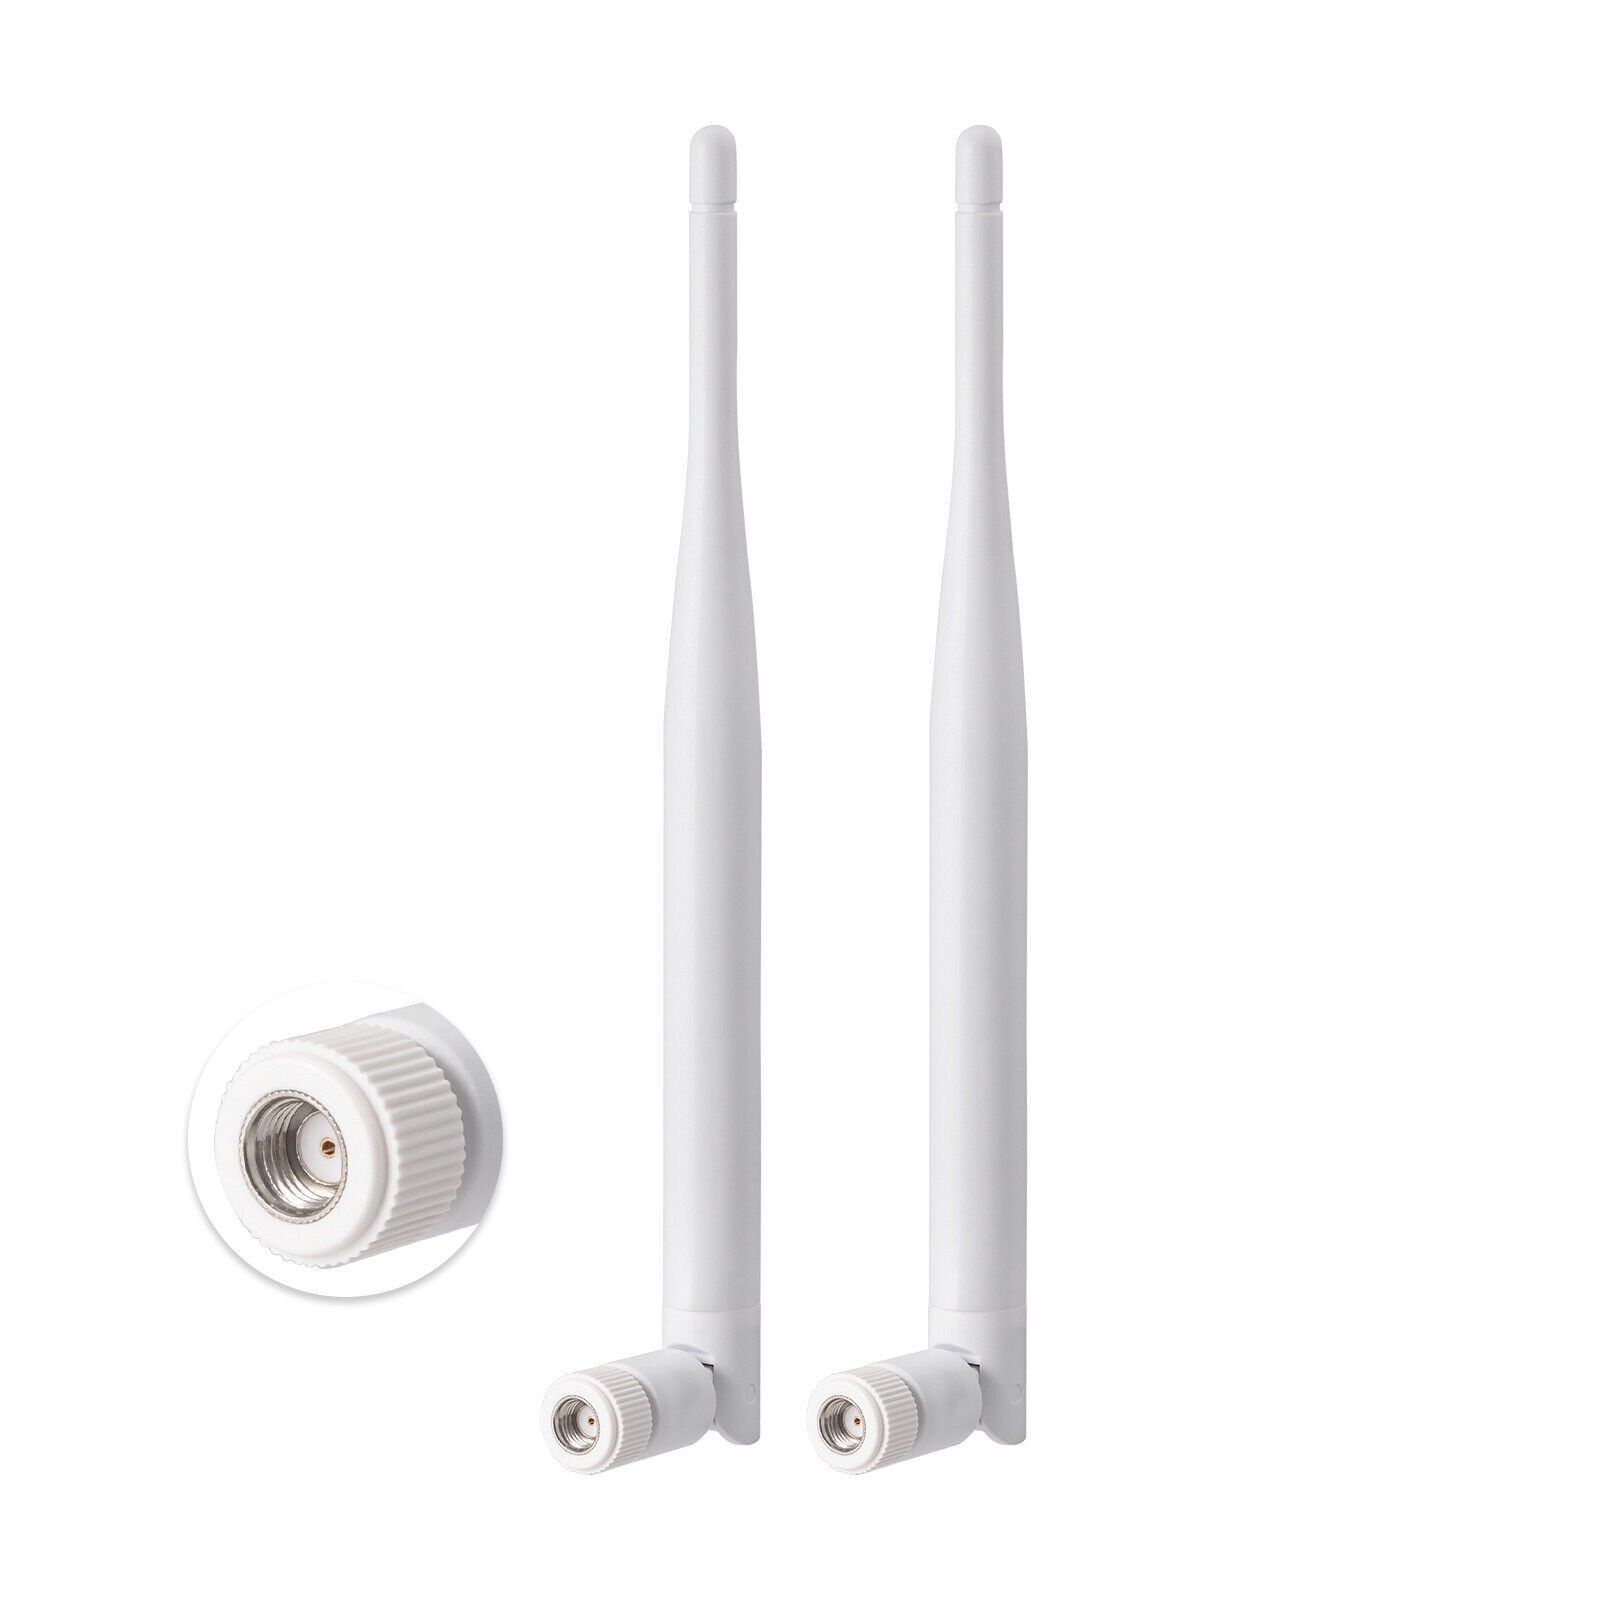 2pcs White 2.4GHz 5GHz 6dBi WiFi Antenna RP-SMA Male for IP Security Camera